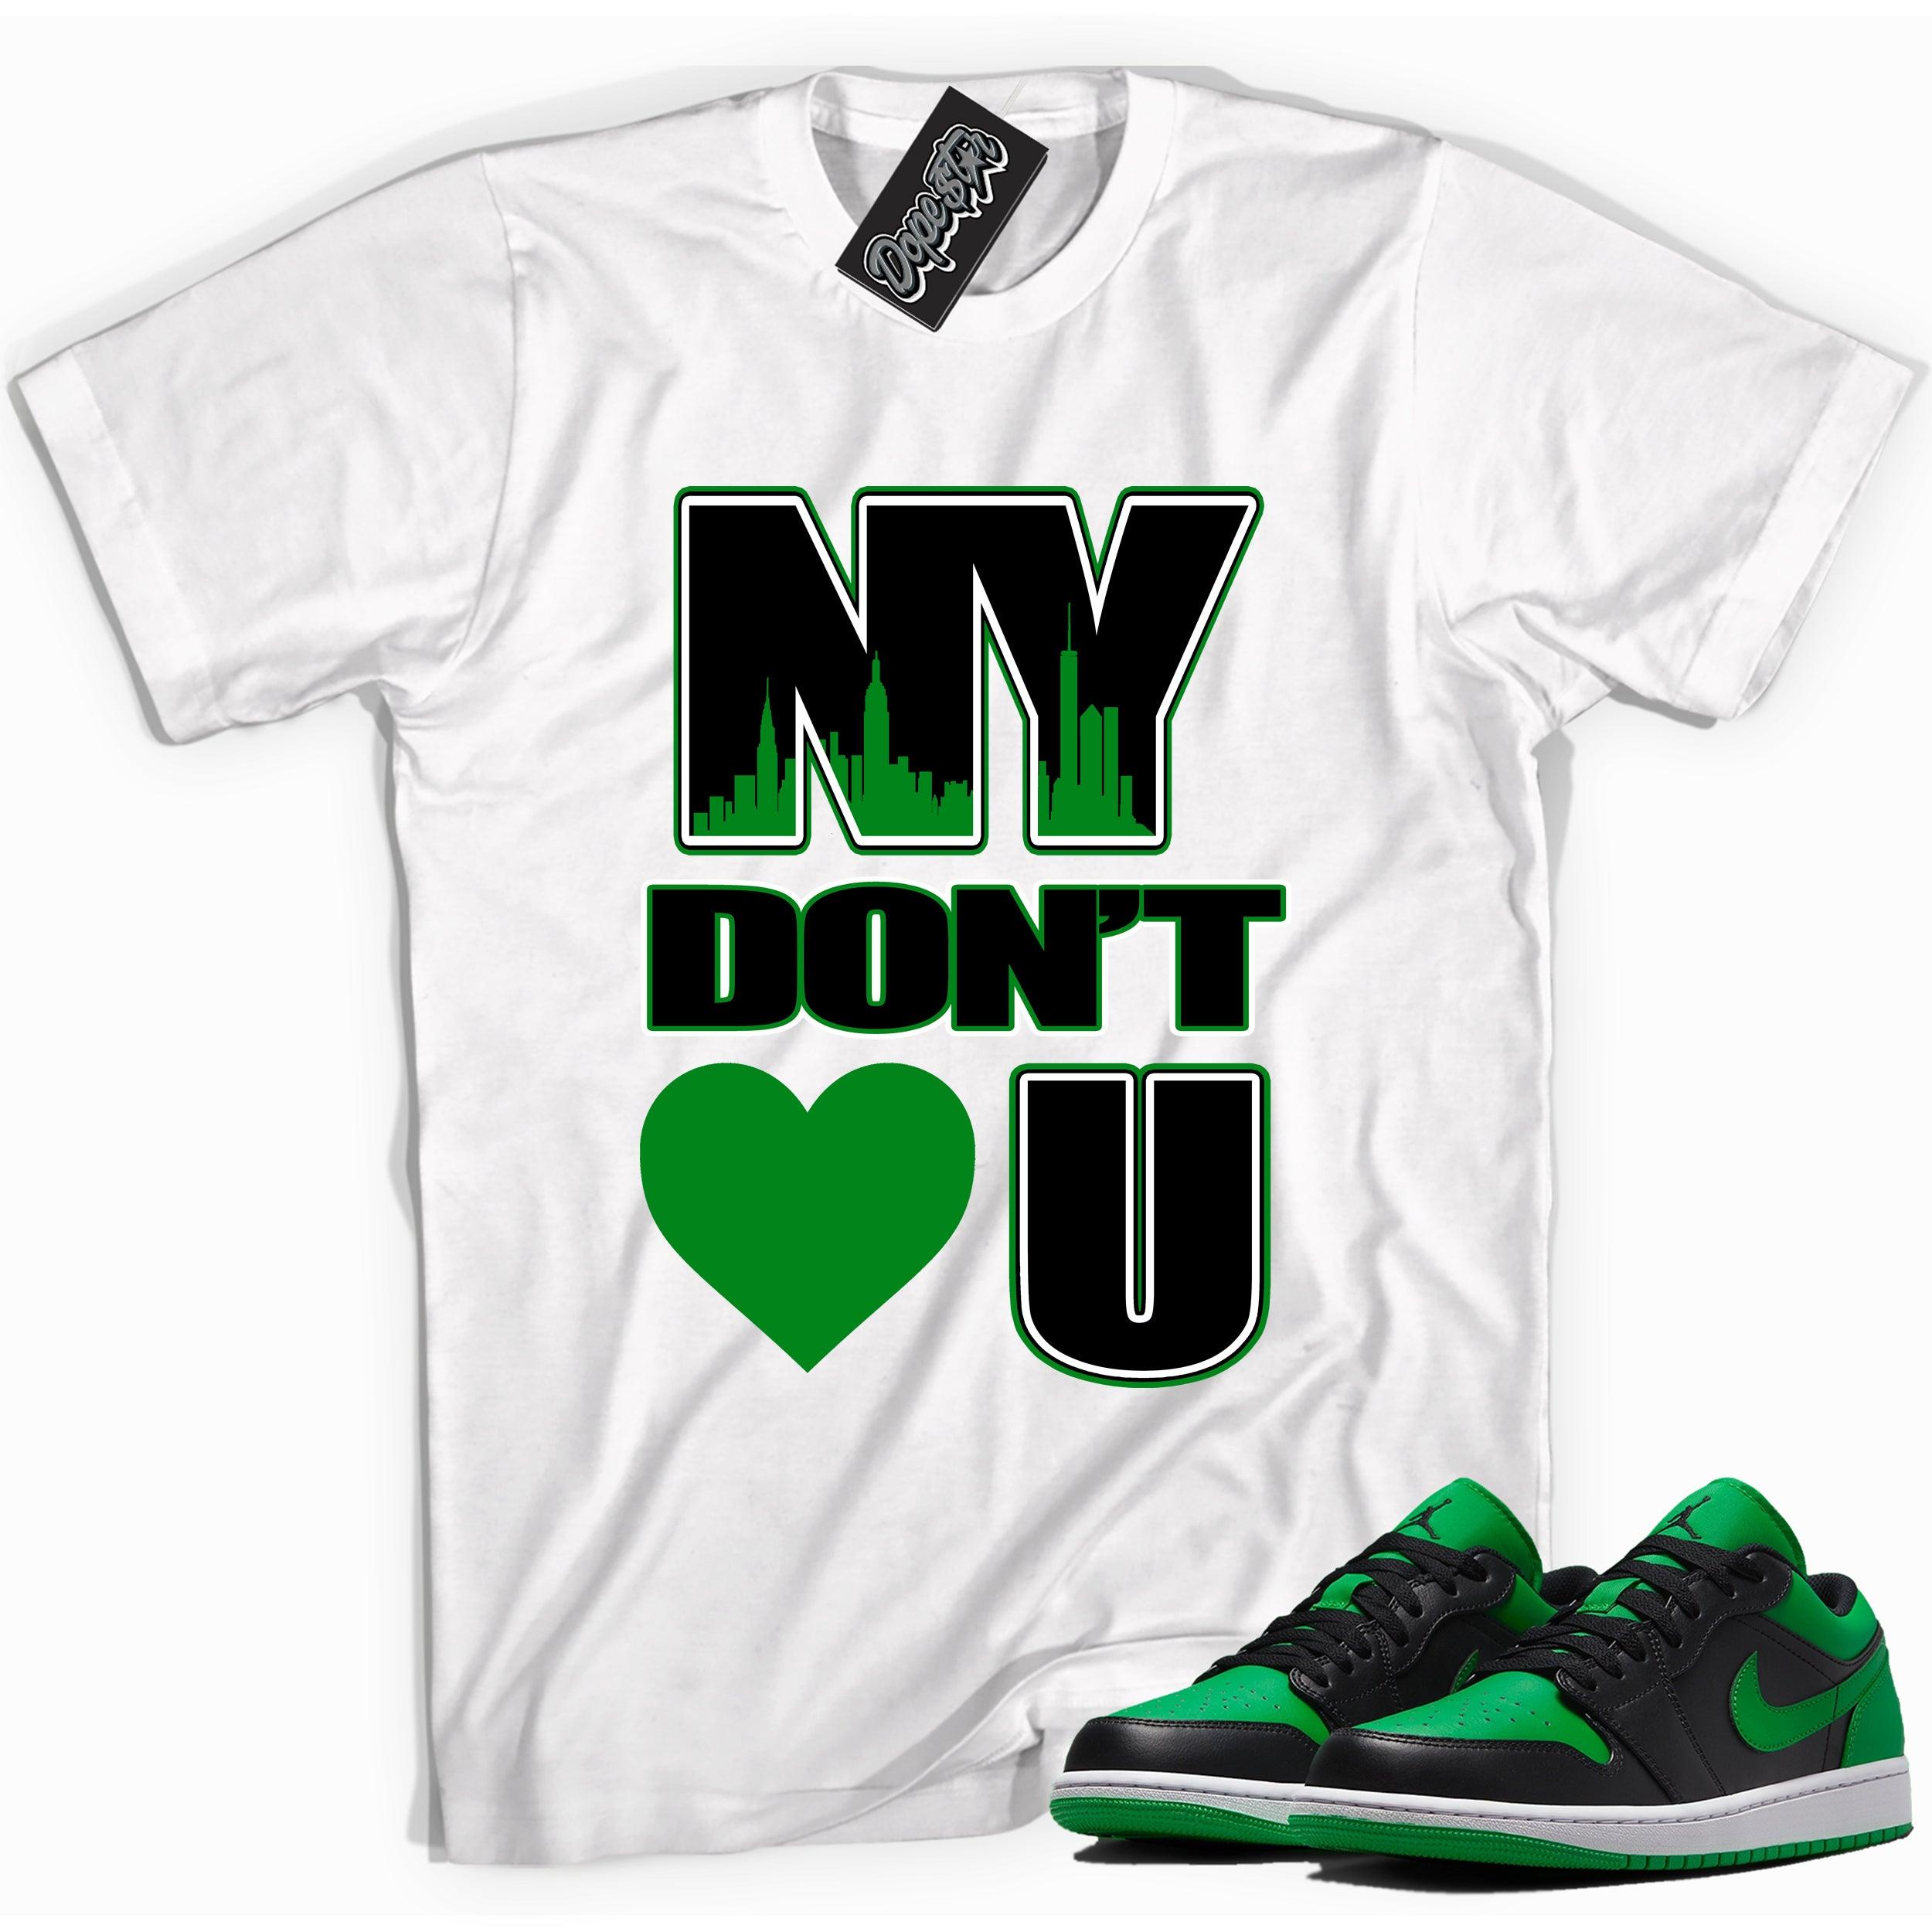 Cool white graphic tee with 'NY Don't Love You' print, that perfectly matches Air Jordan 1 Low Lucky Green sneakers